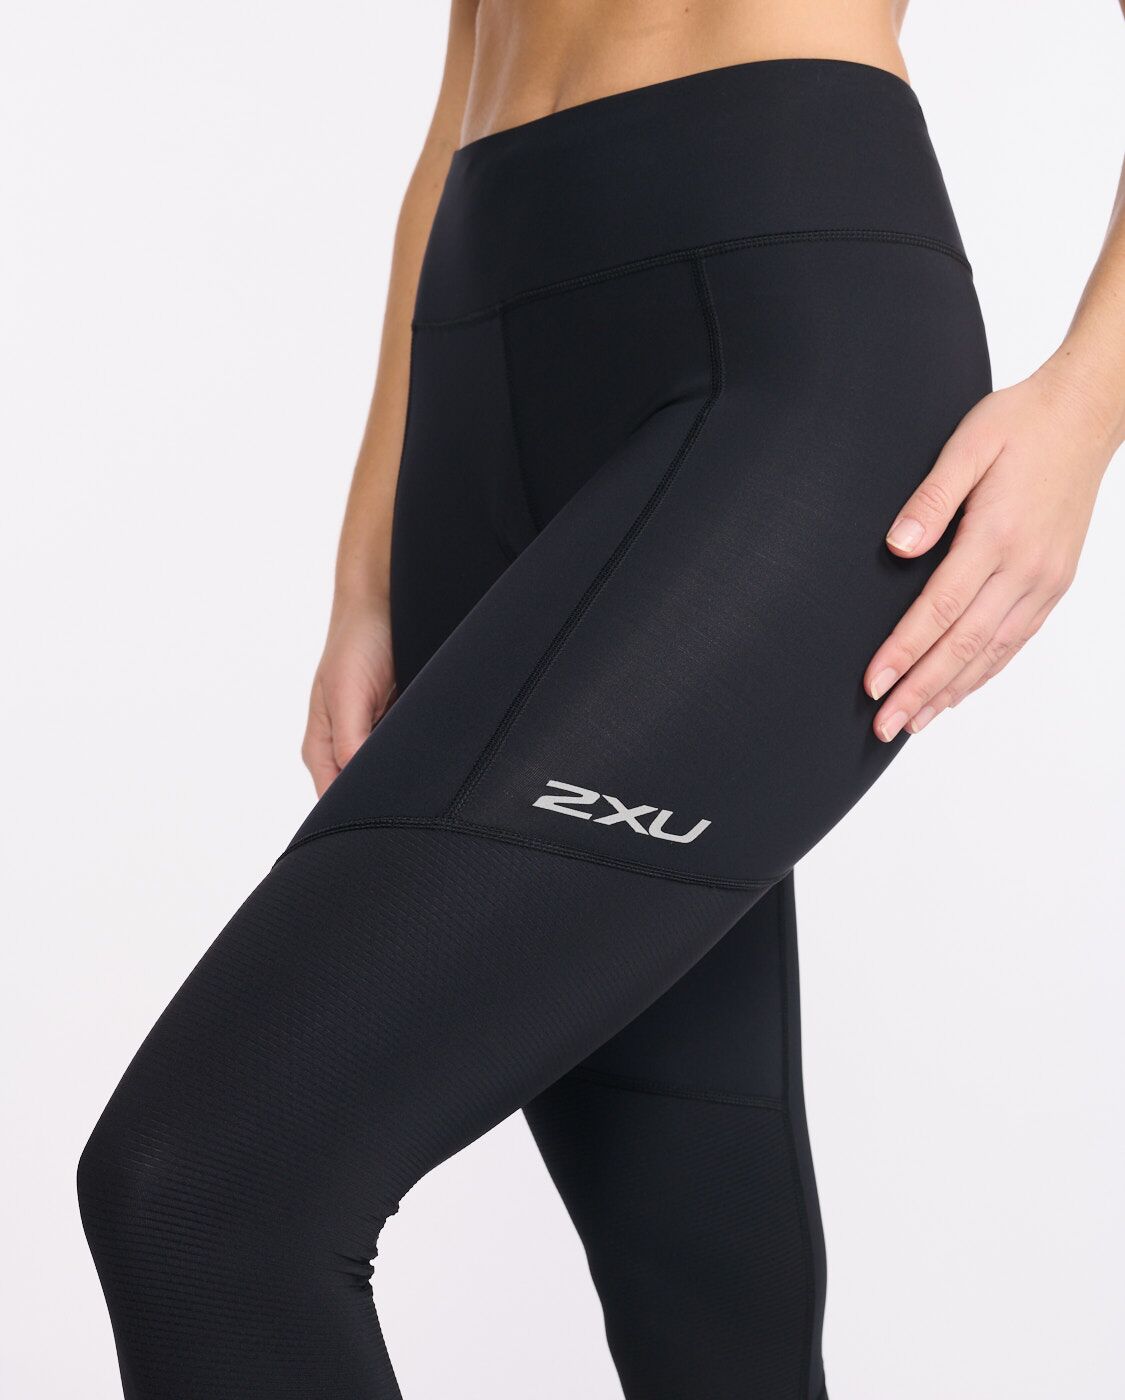 2XU South Africa - Womens Aero Vent Mid-Rise Compression Tights - Black/Silver Reflective